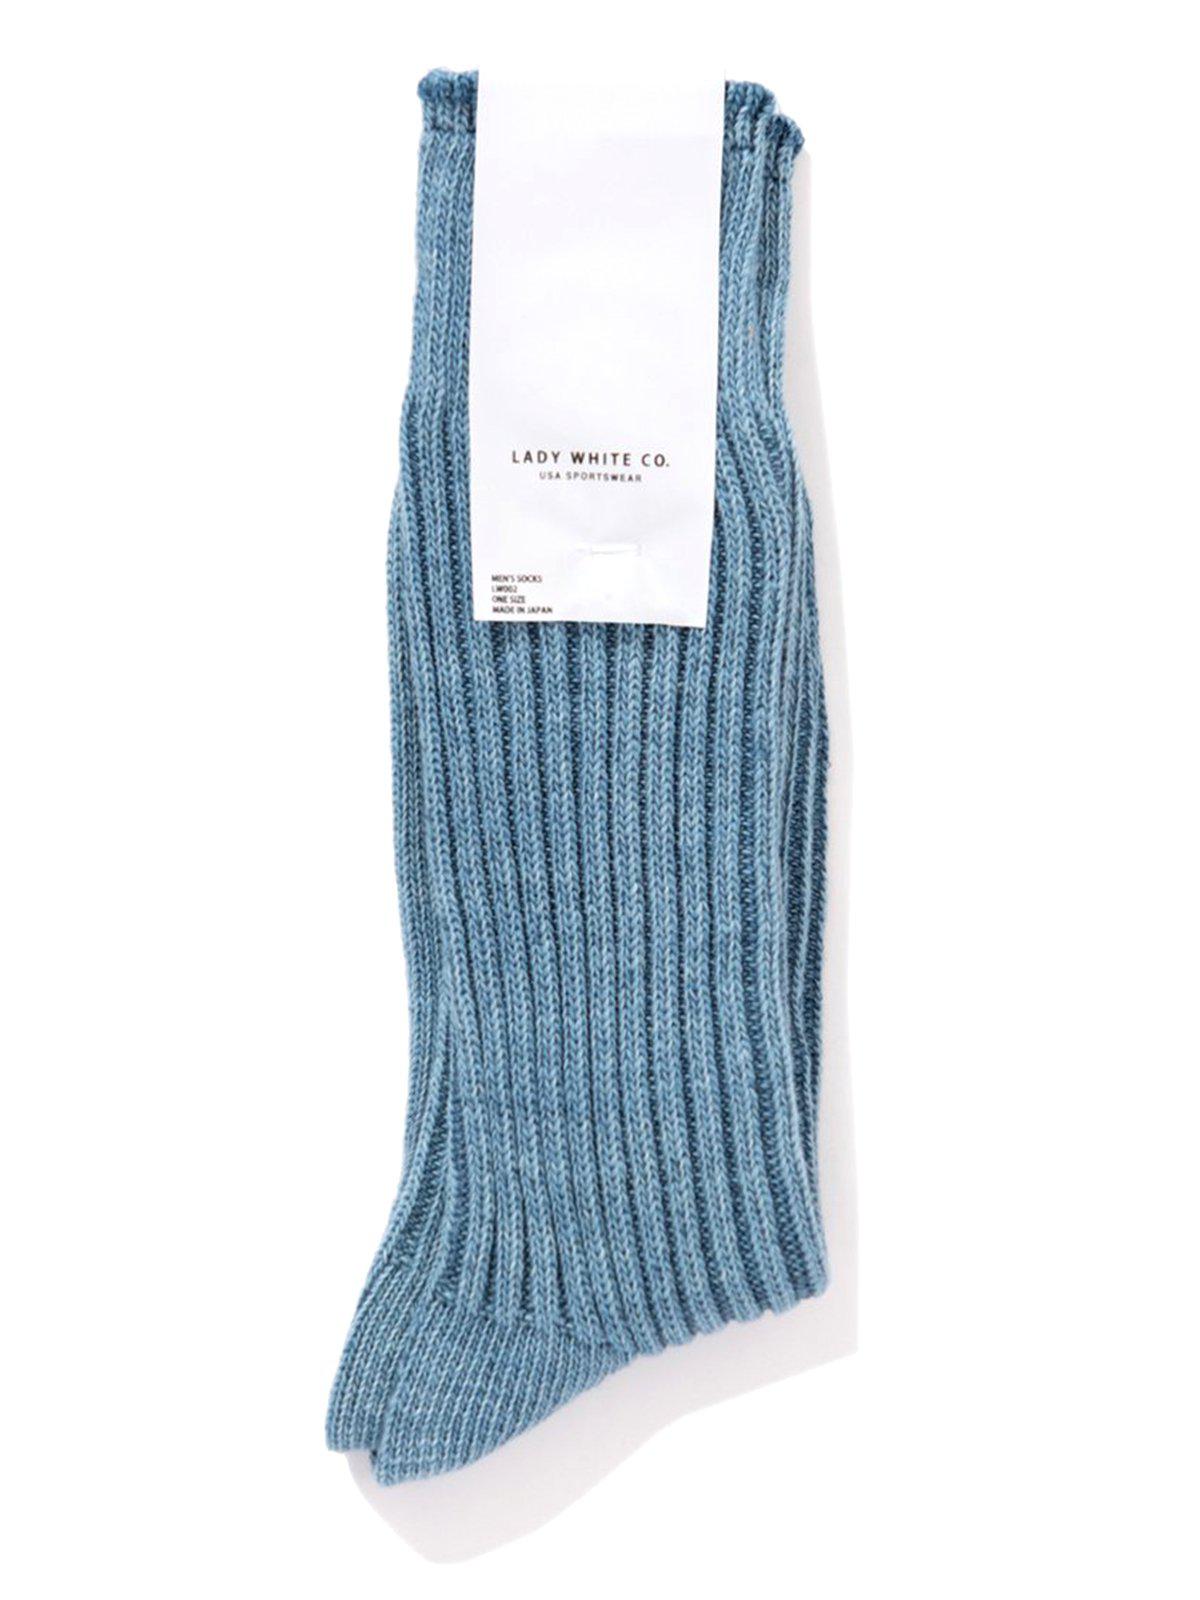 Lady White Co. Athletic Socks Light Blue - MORE by Morello Indonesia